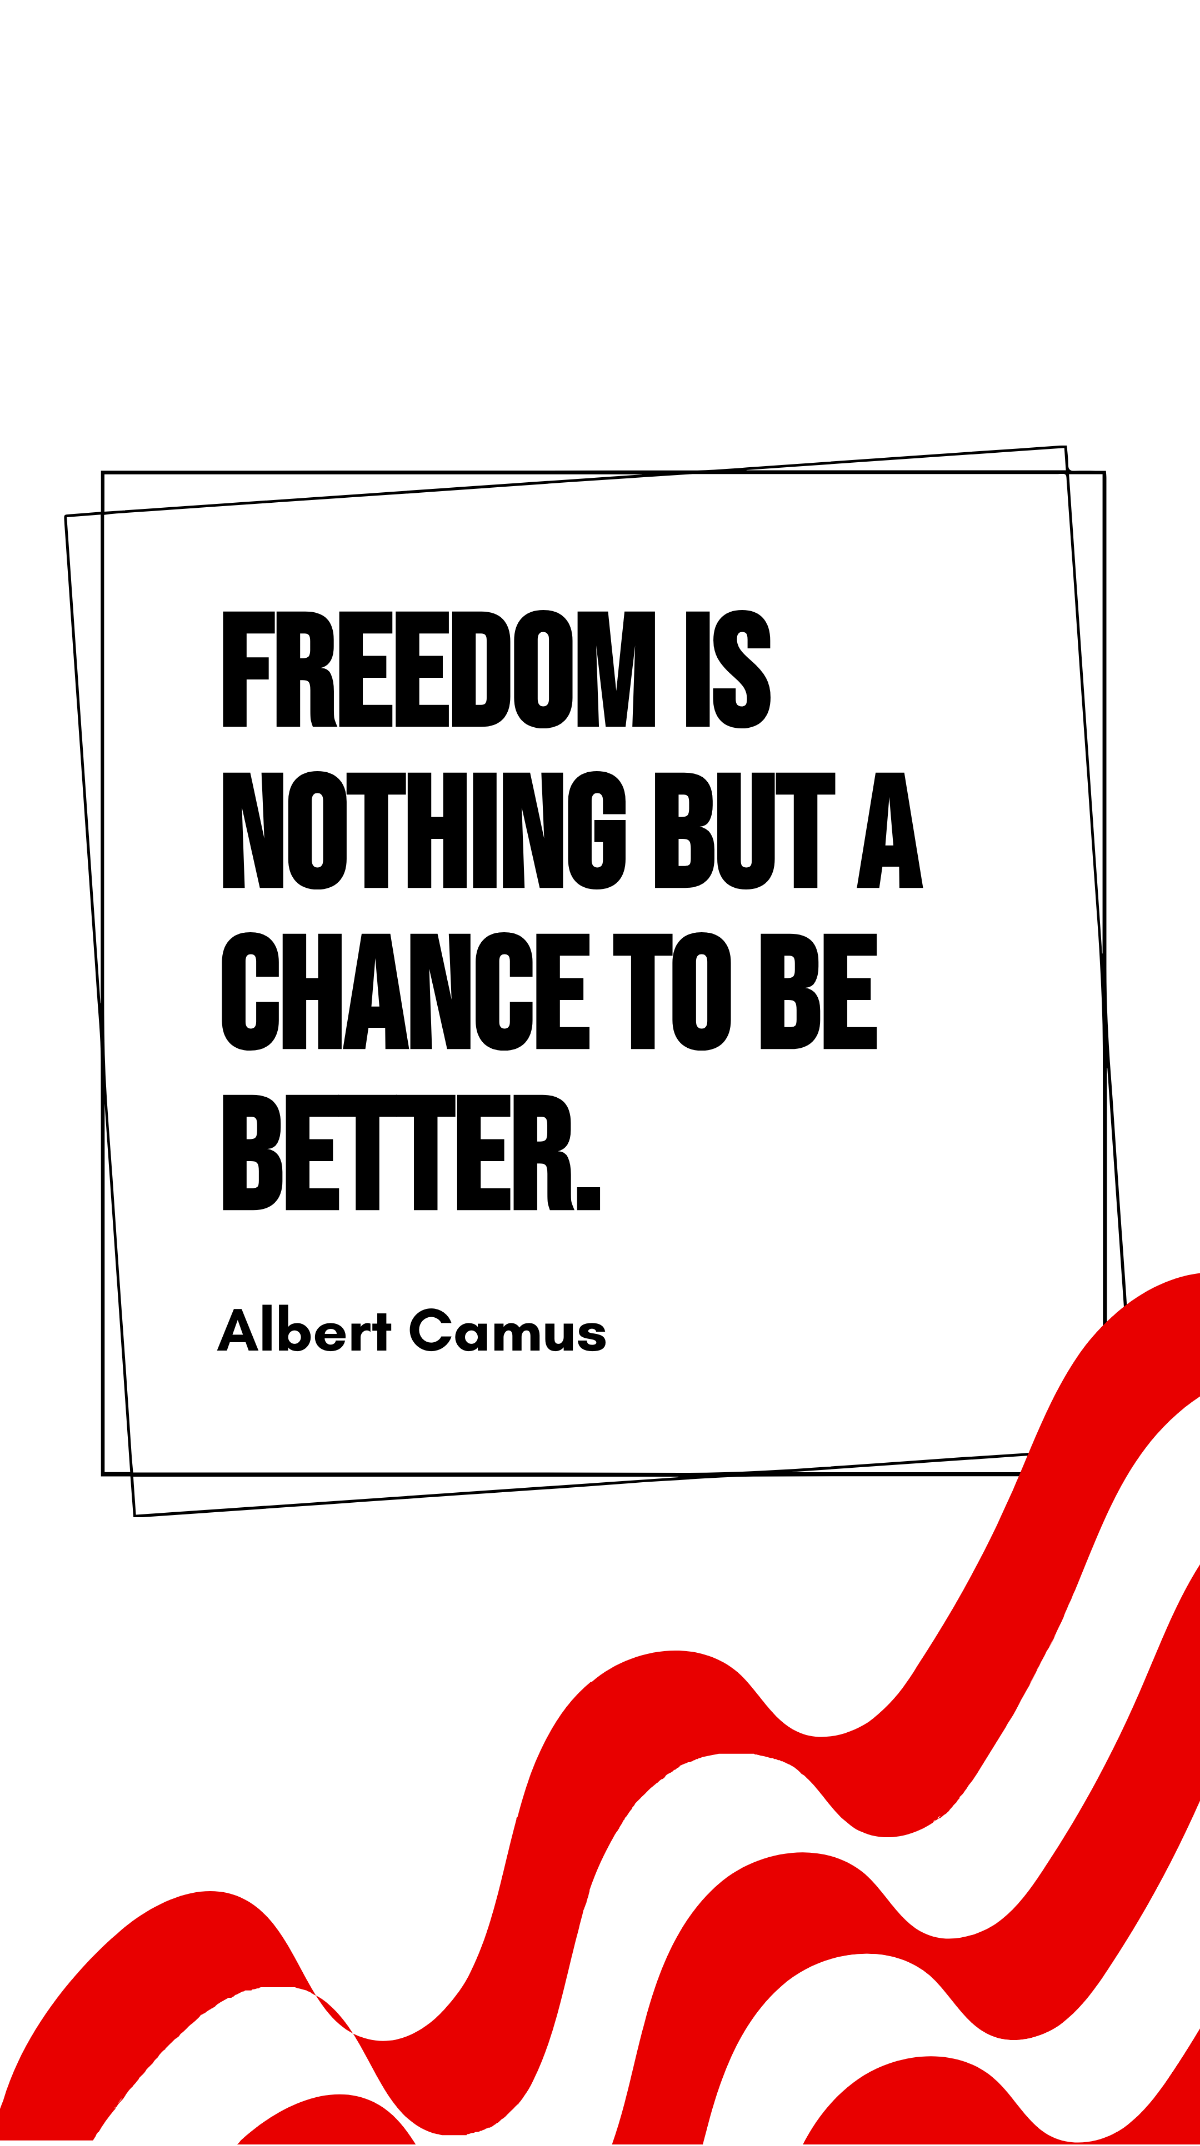 Albert Camus - Freedom is nothing but a chance to be better. Template